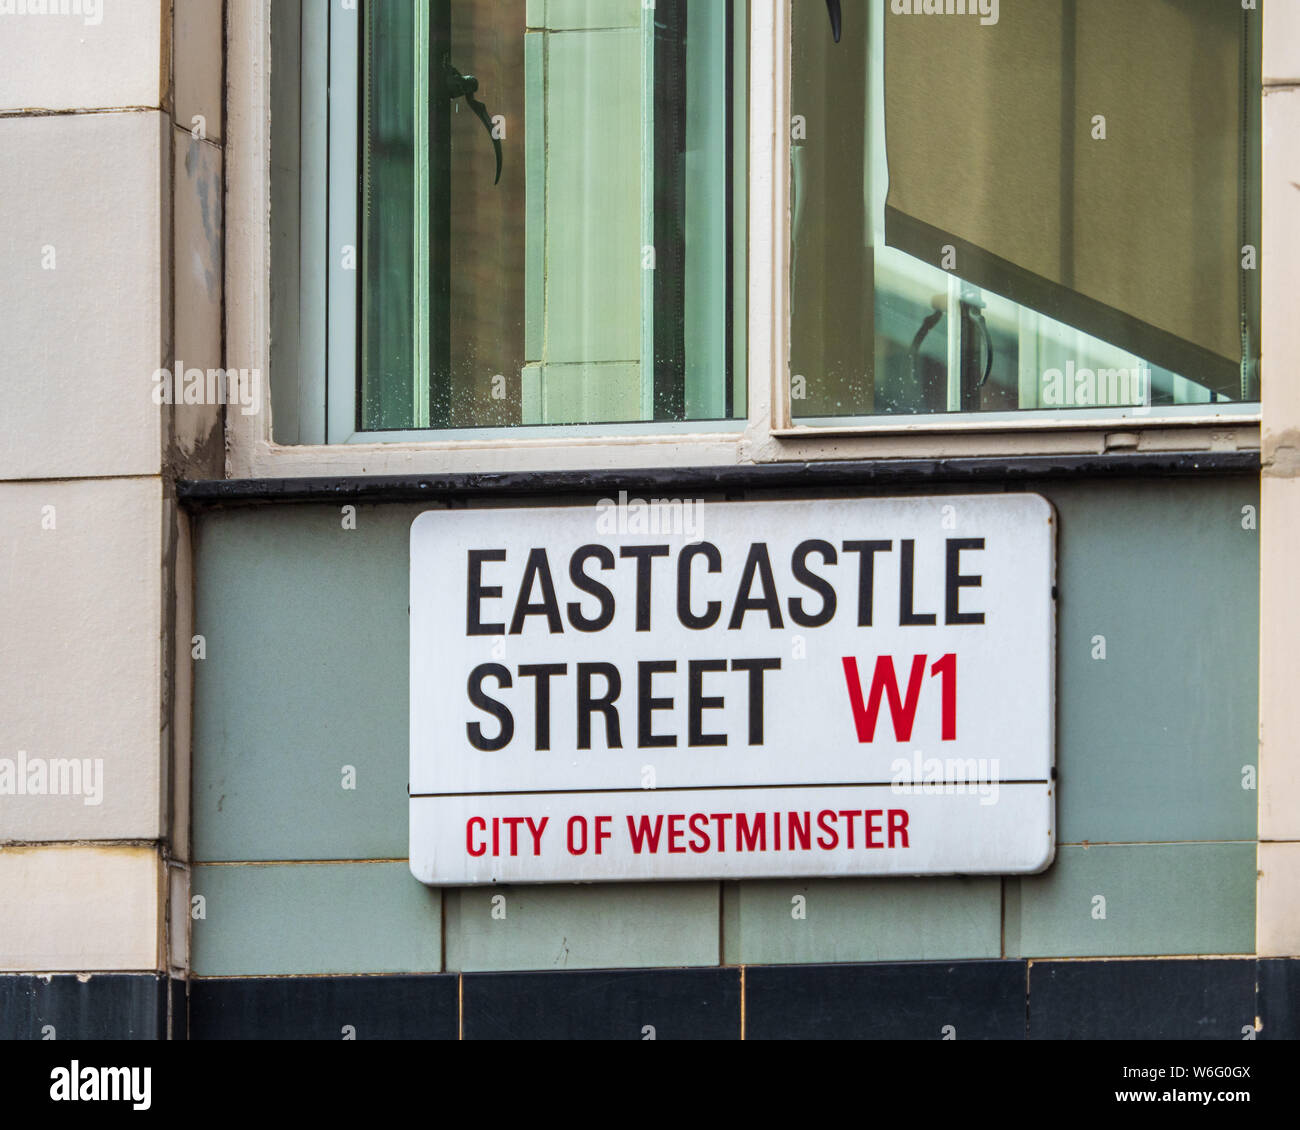 Eastcastle Street W1 - London Street Sign for Eastcastle St in the Fitzrovia district of London's West End Stock Photo